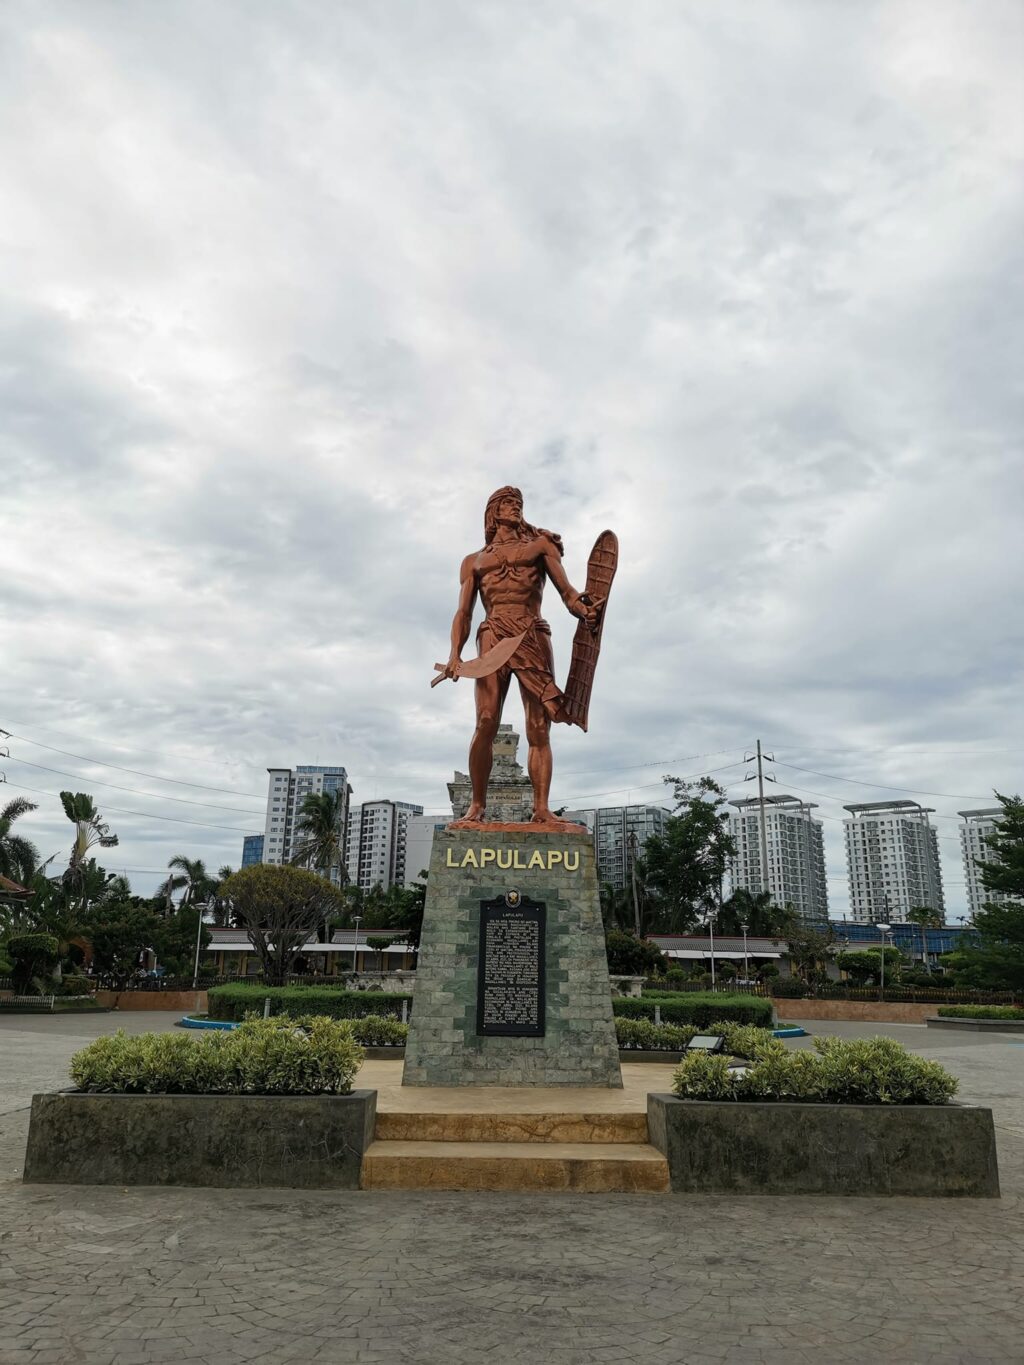 The statue of Datu Lapulapu that is now located at the Liberty Shrine in Barangay Mactan.